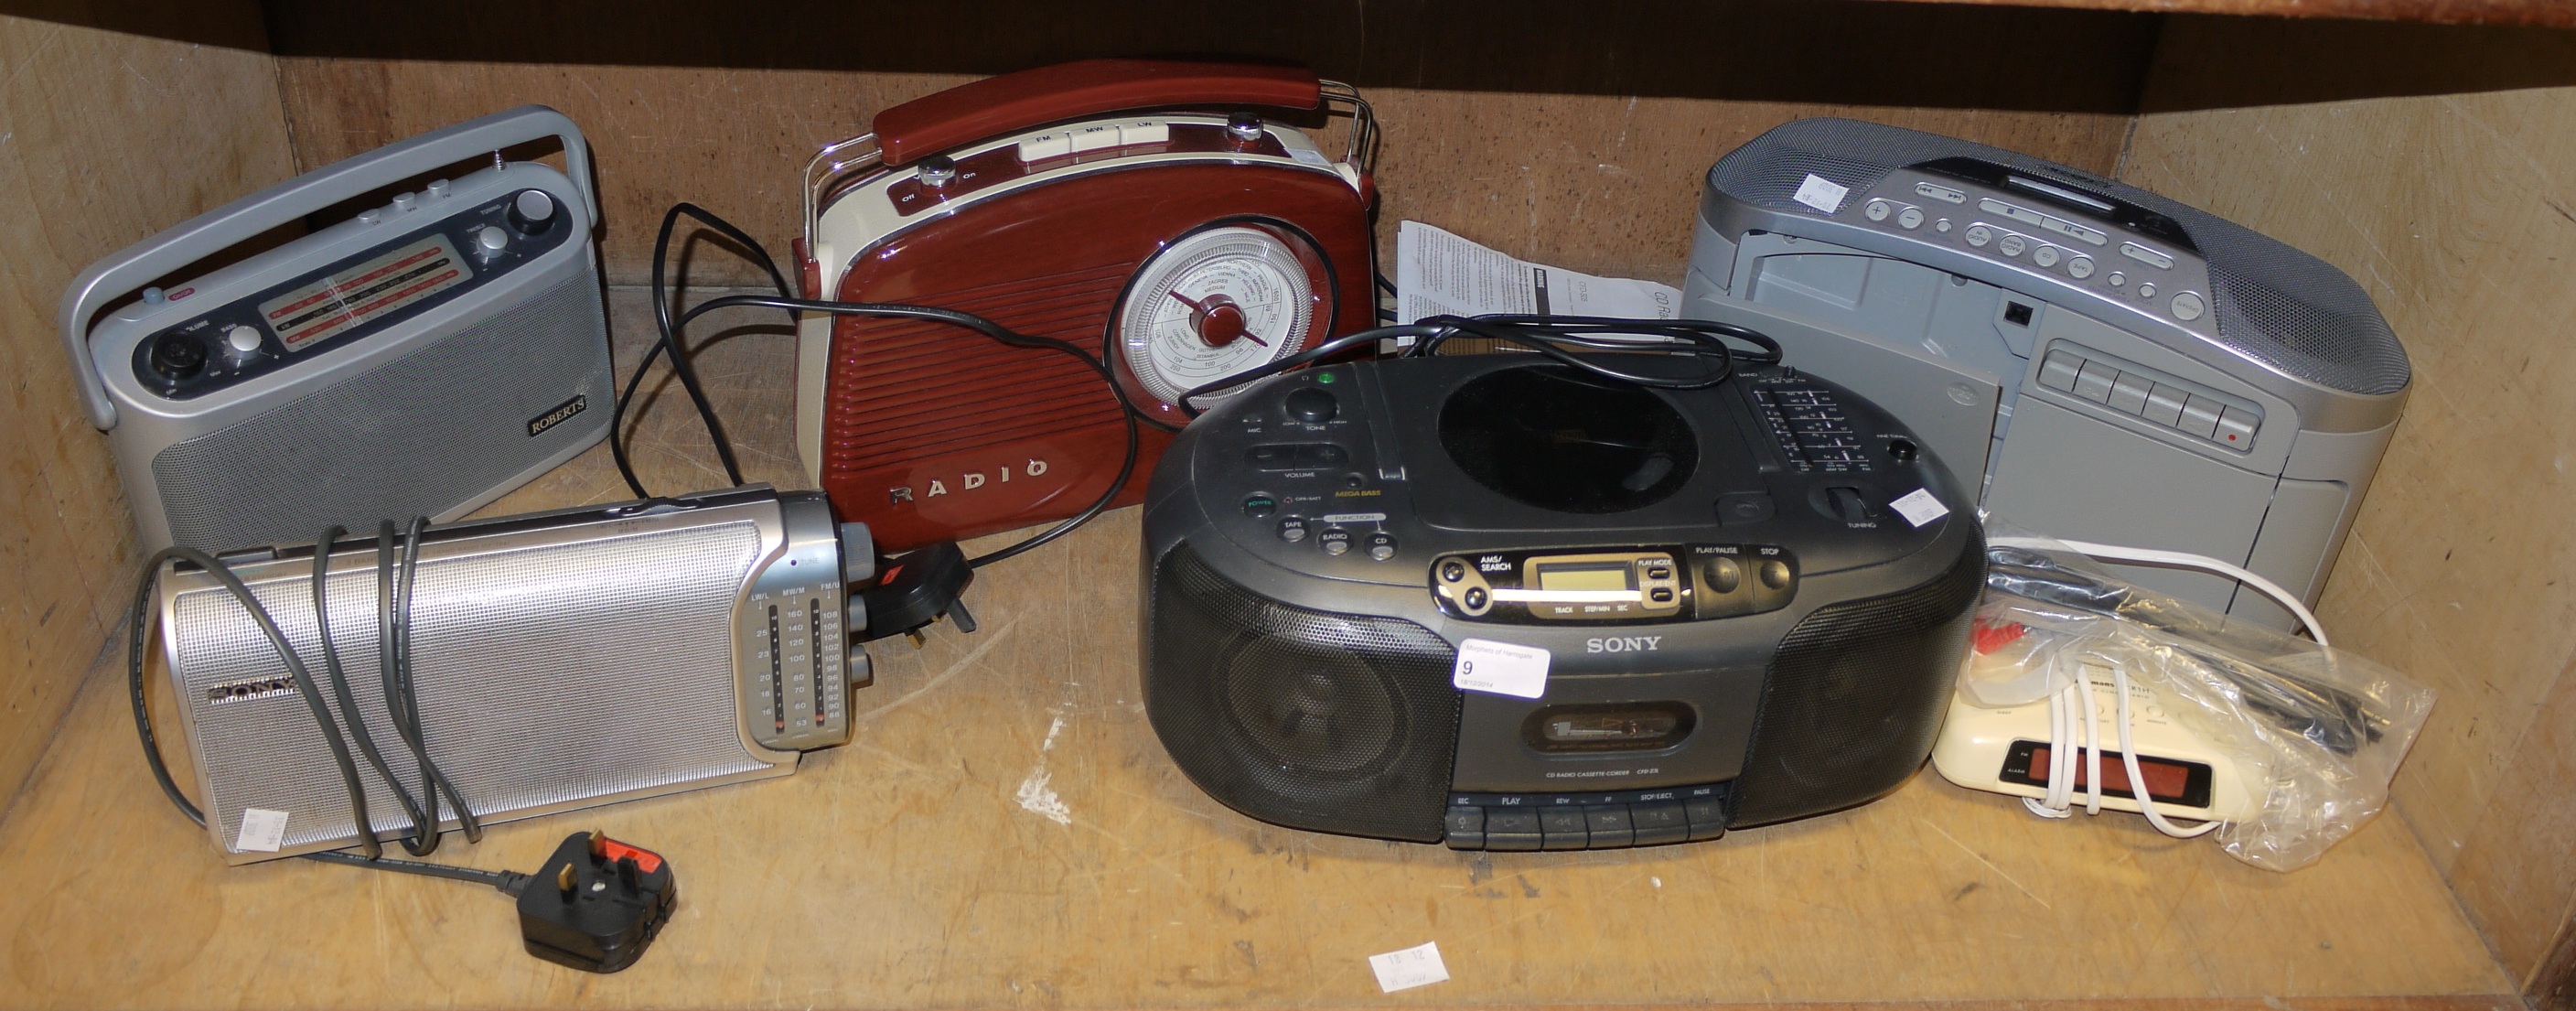 Two Roberts radios, Sony CD player and o